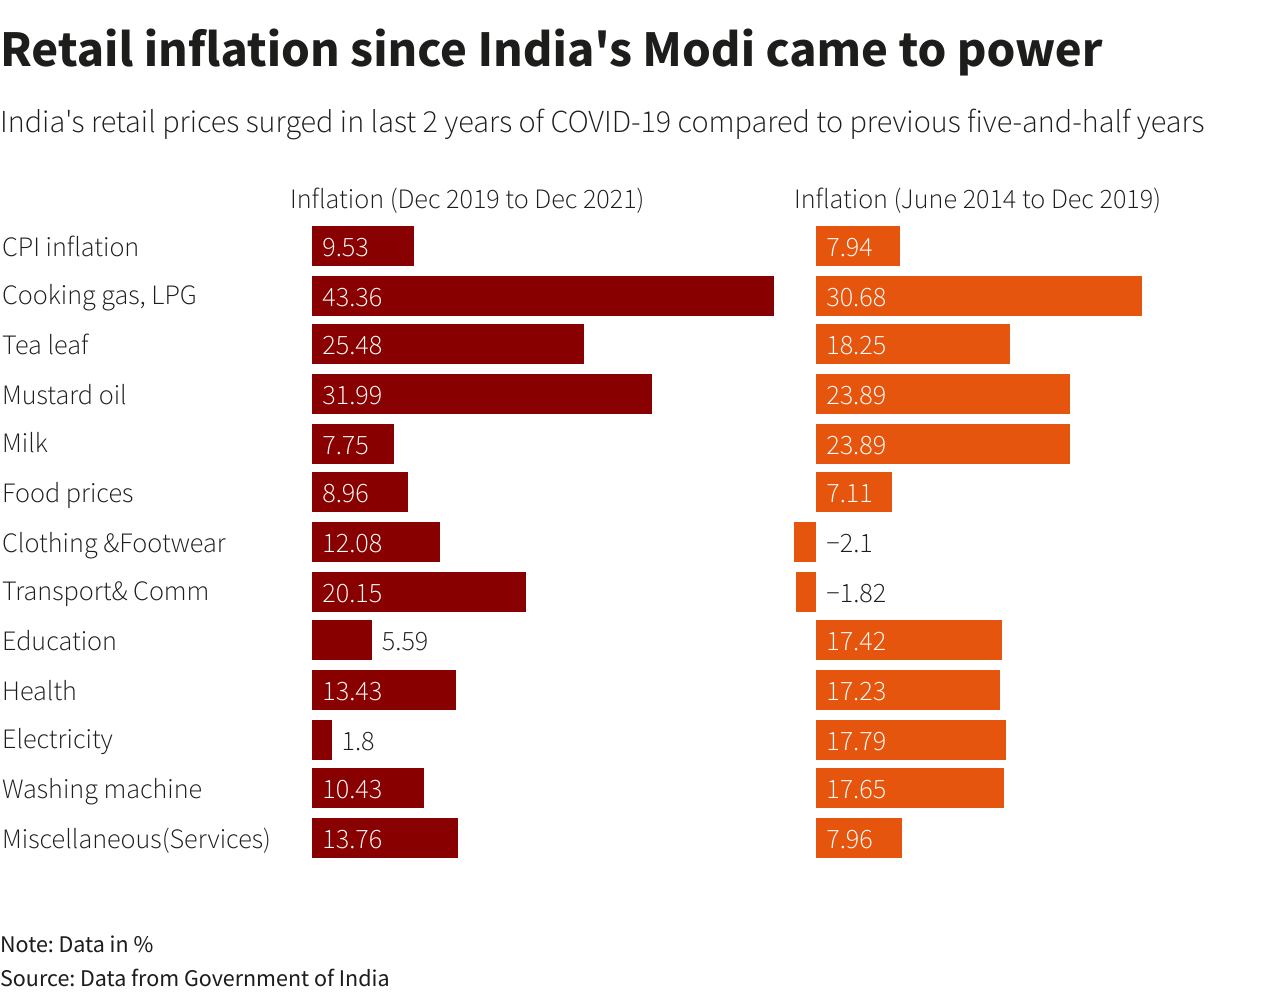 Retail inflation since India's Modi came to power